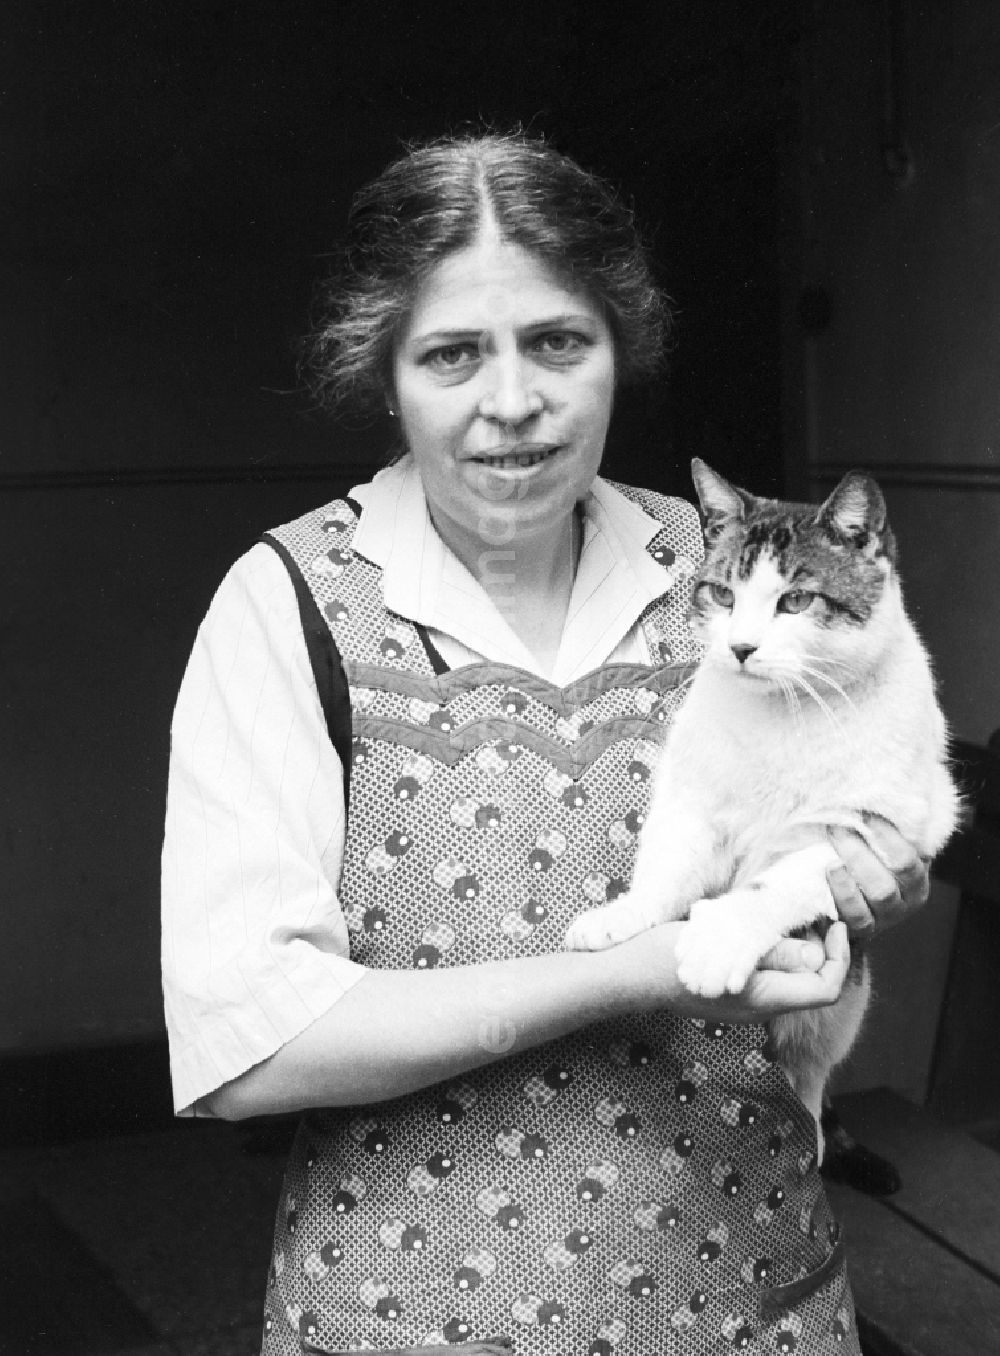 Arnstadt: A woman with striking features and smock apron holds a cat on the arm in Arnstadt in the federal state Thuringia in the area of the former GDR, German democratic republic